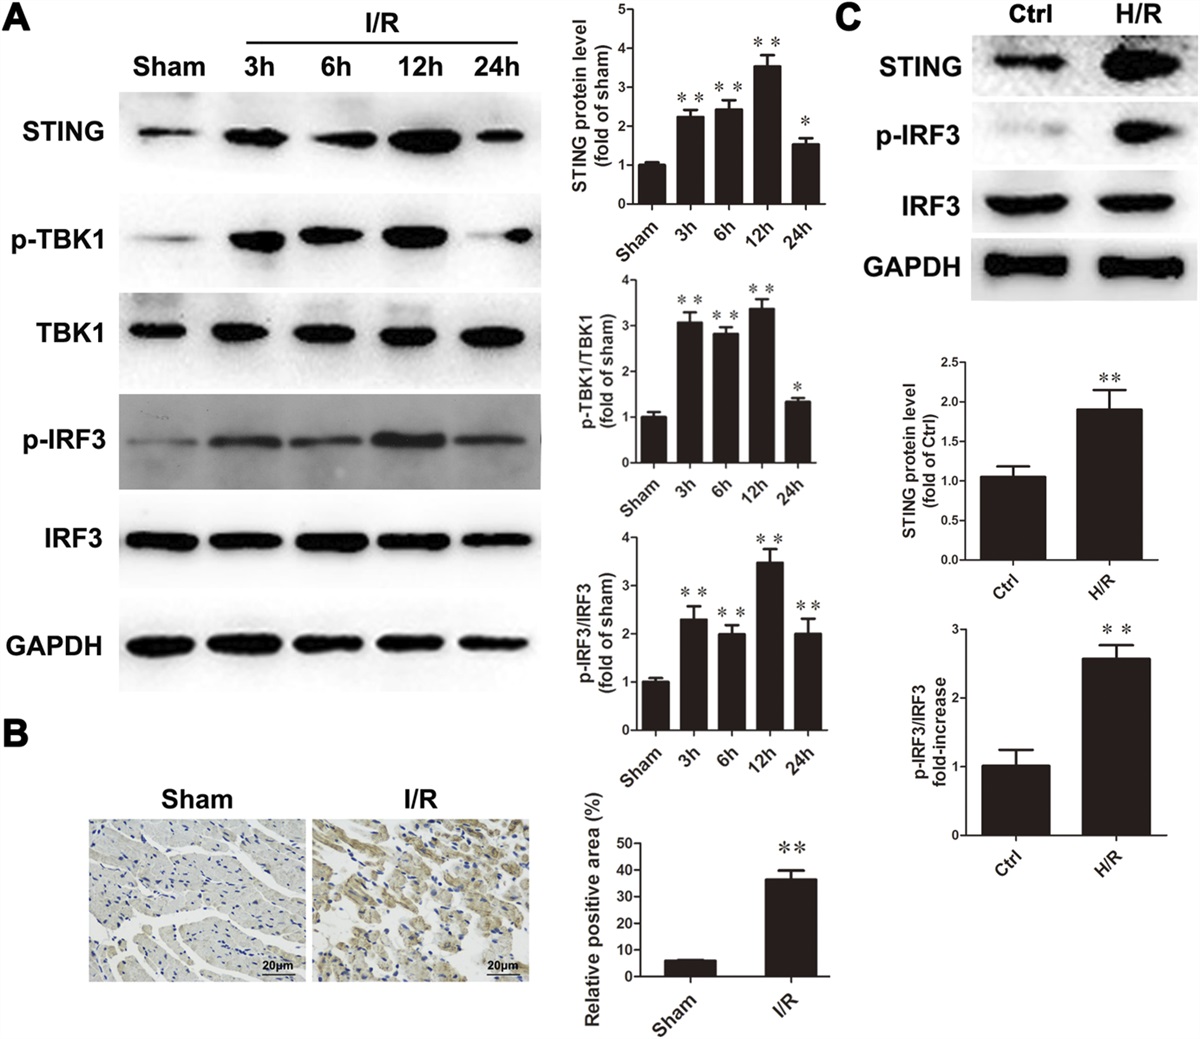 The STING-IRF3 Signaling Pathway, Mediated by Endoplasmic Reticulum Stress, Contributes to Impaired Myocardial Autophagic Flux After Ischemia/Reperfusion